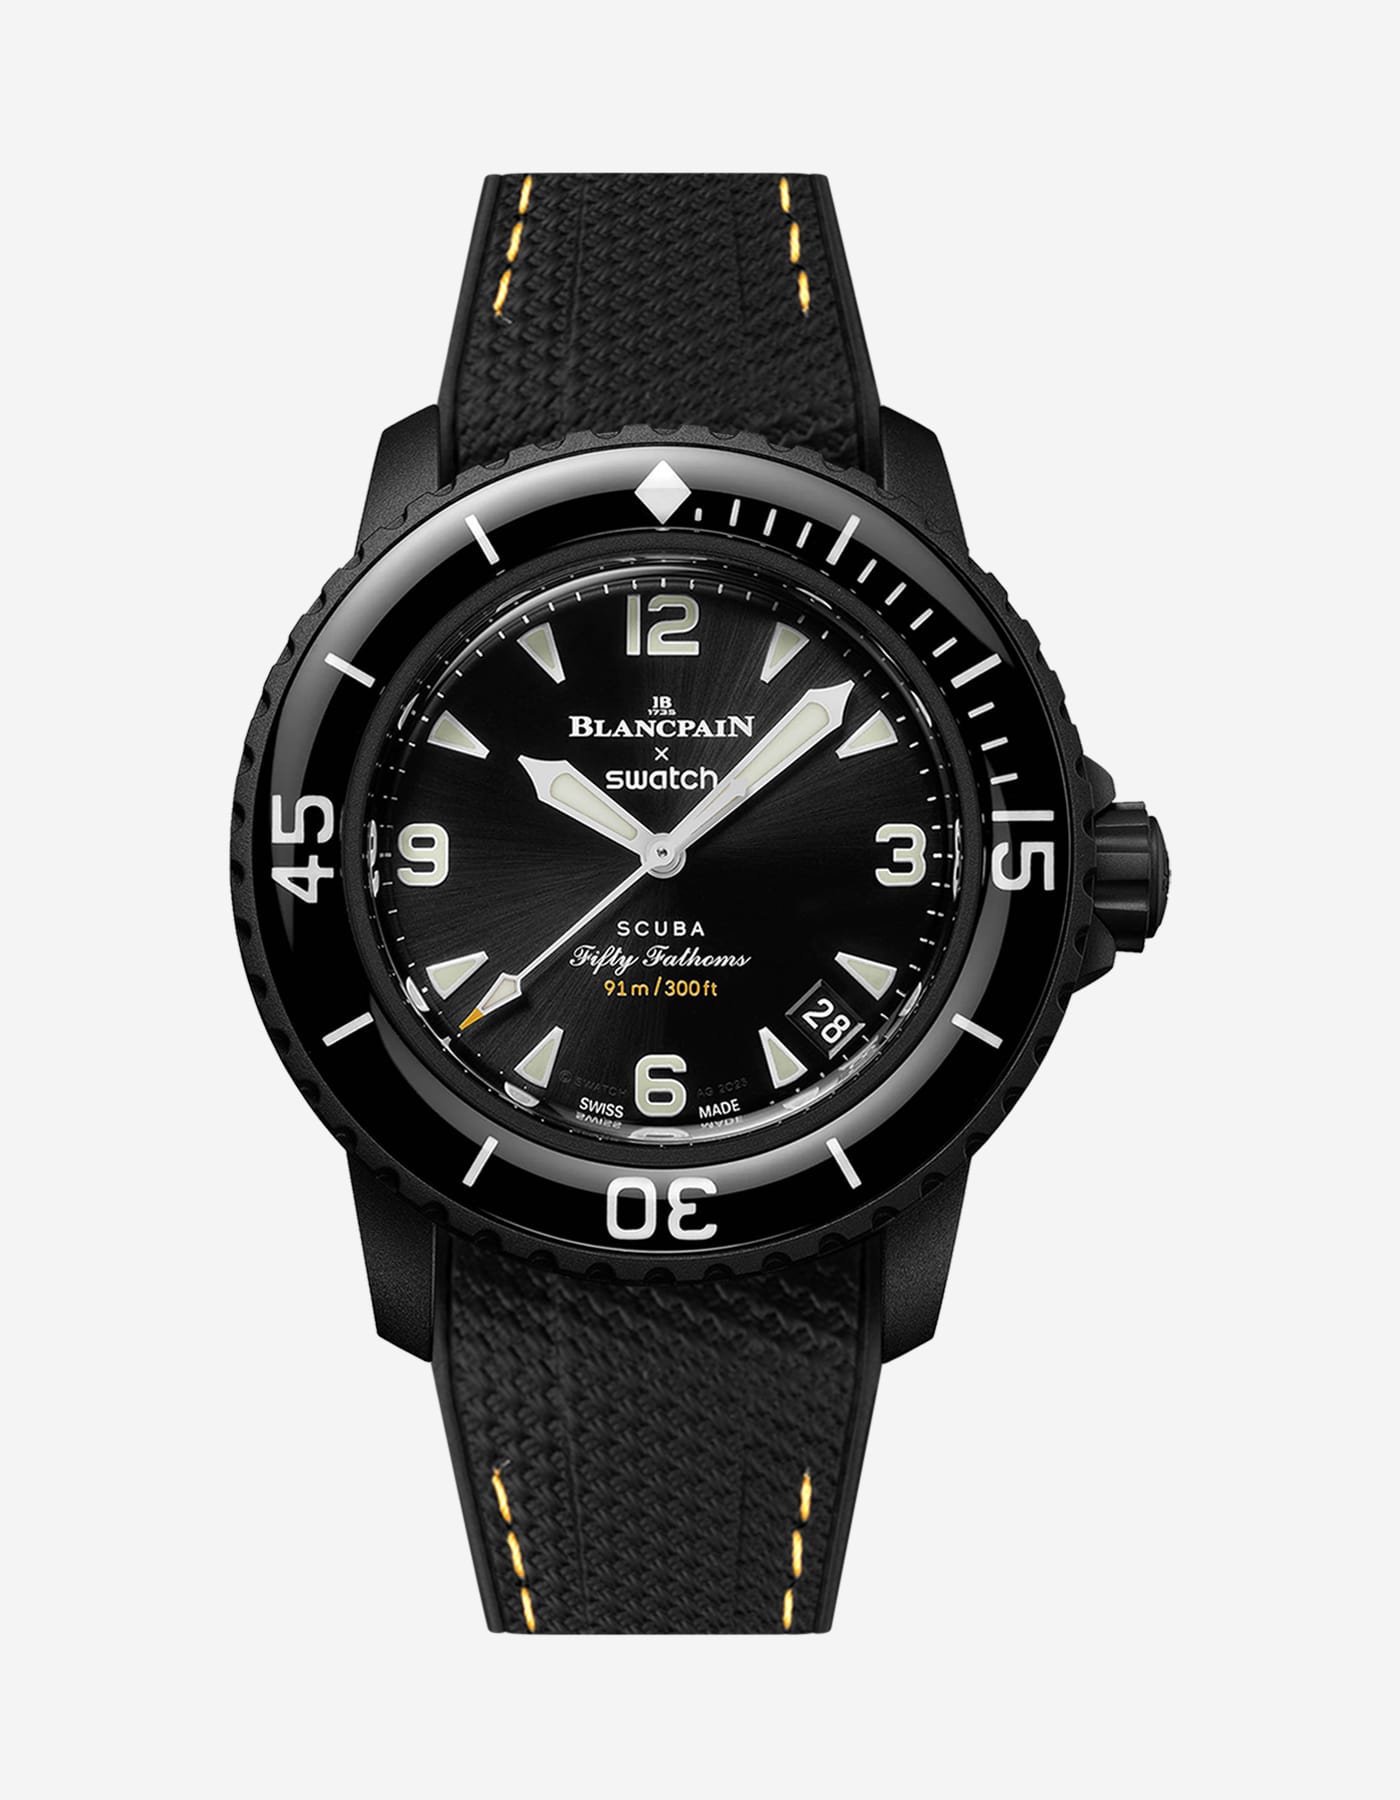 Rubber Watch Strap for Blancpain X Swatch Ocean Of Storms | Wristbuddys.com